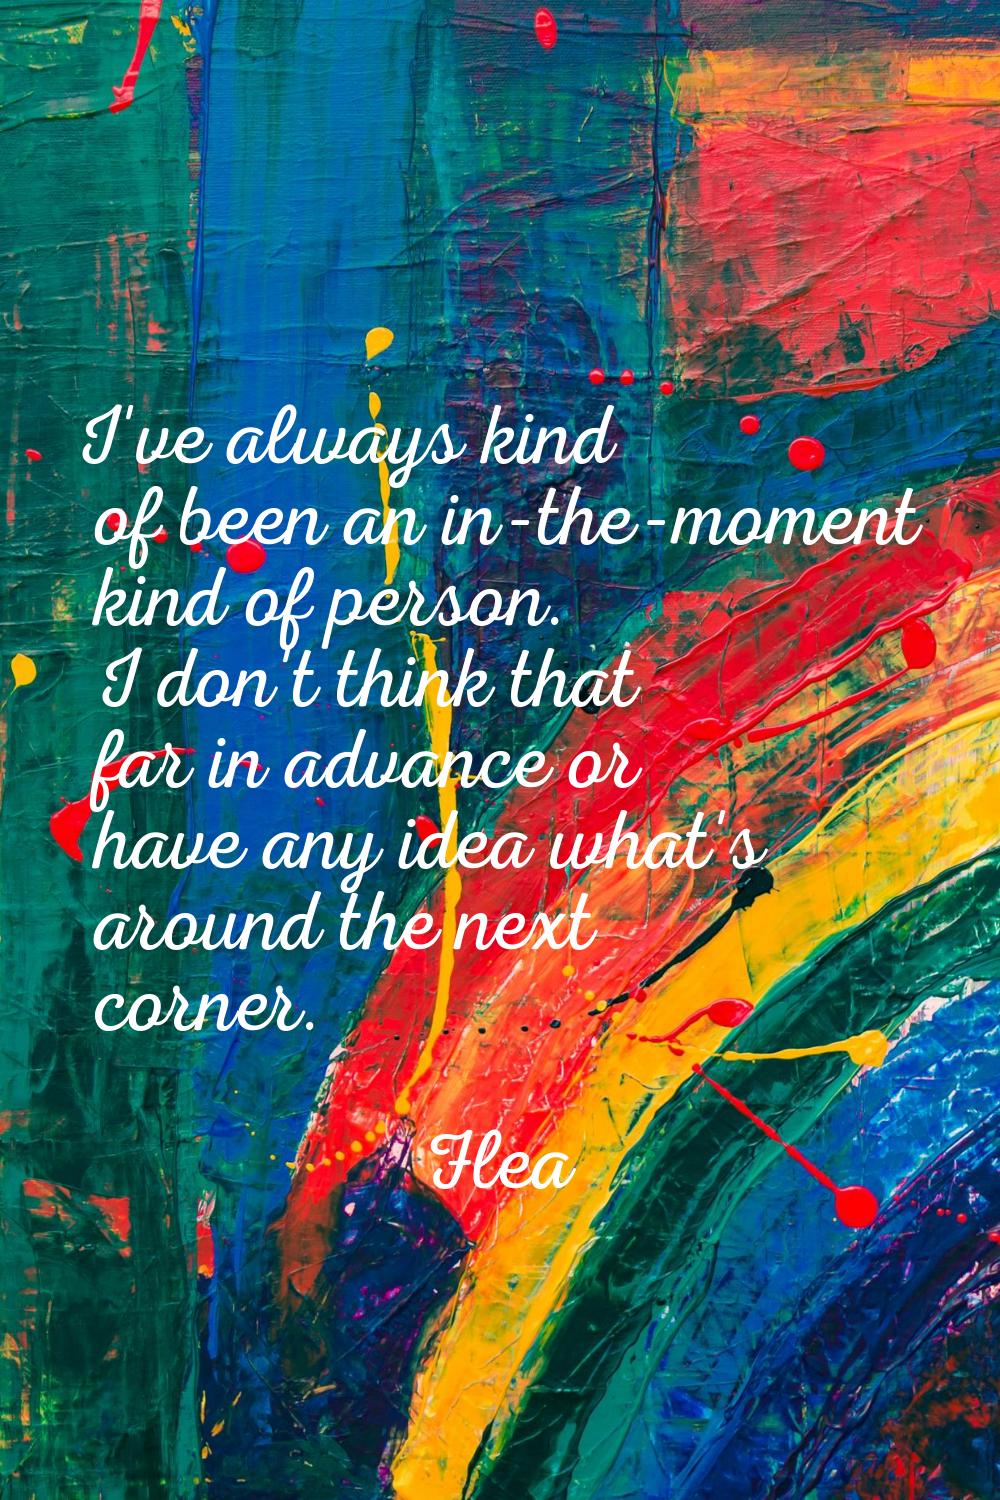 I've always kind of been an in-the-moment kind of person. I don't think that far in advance or have